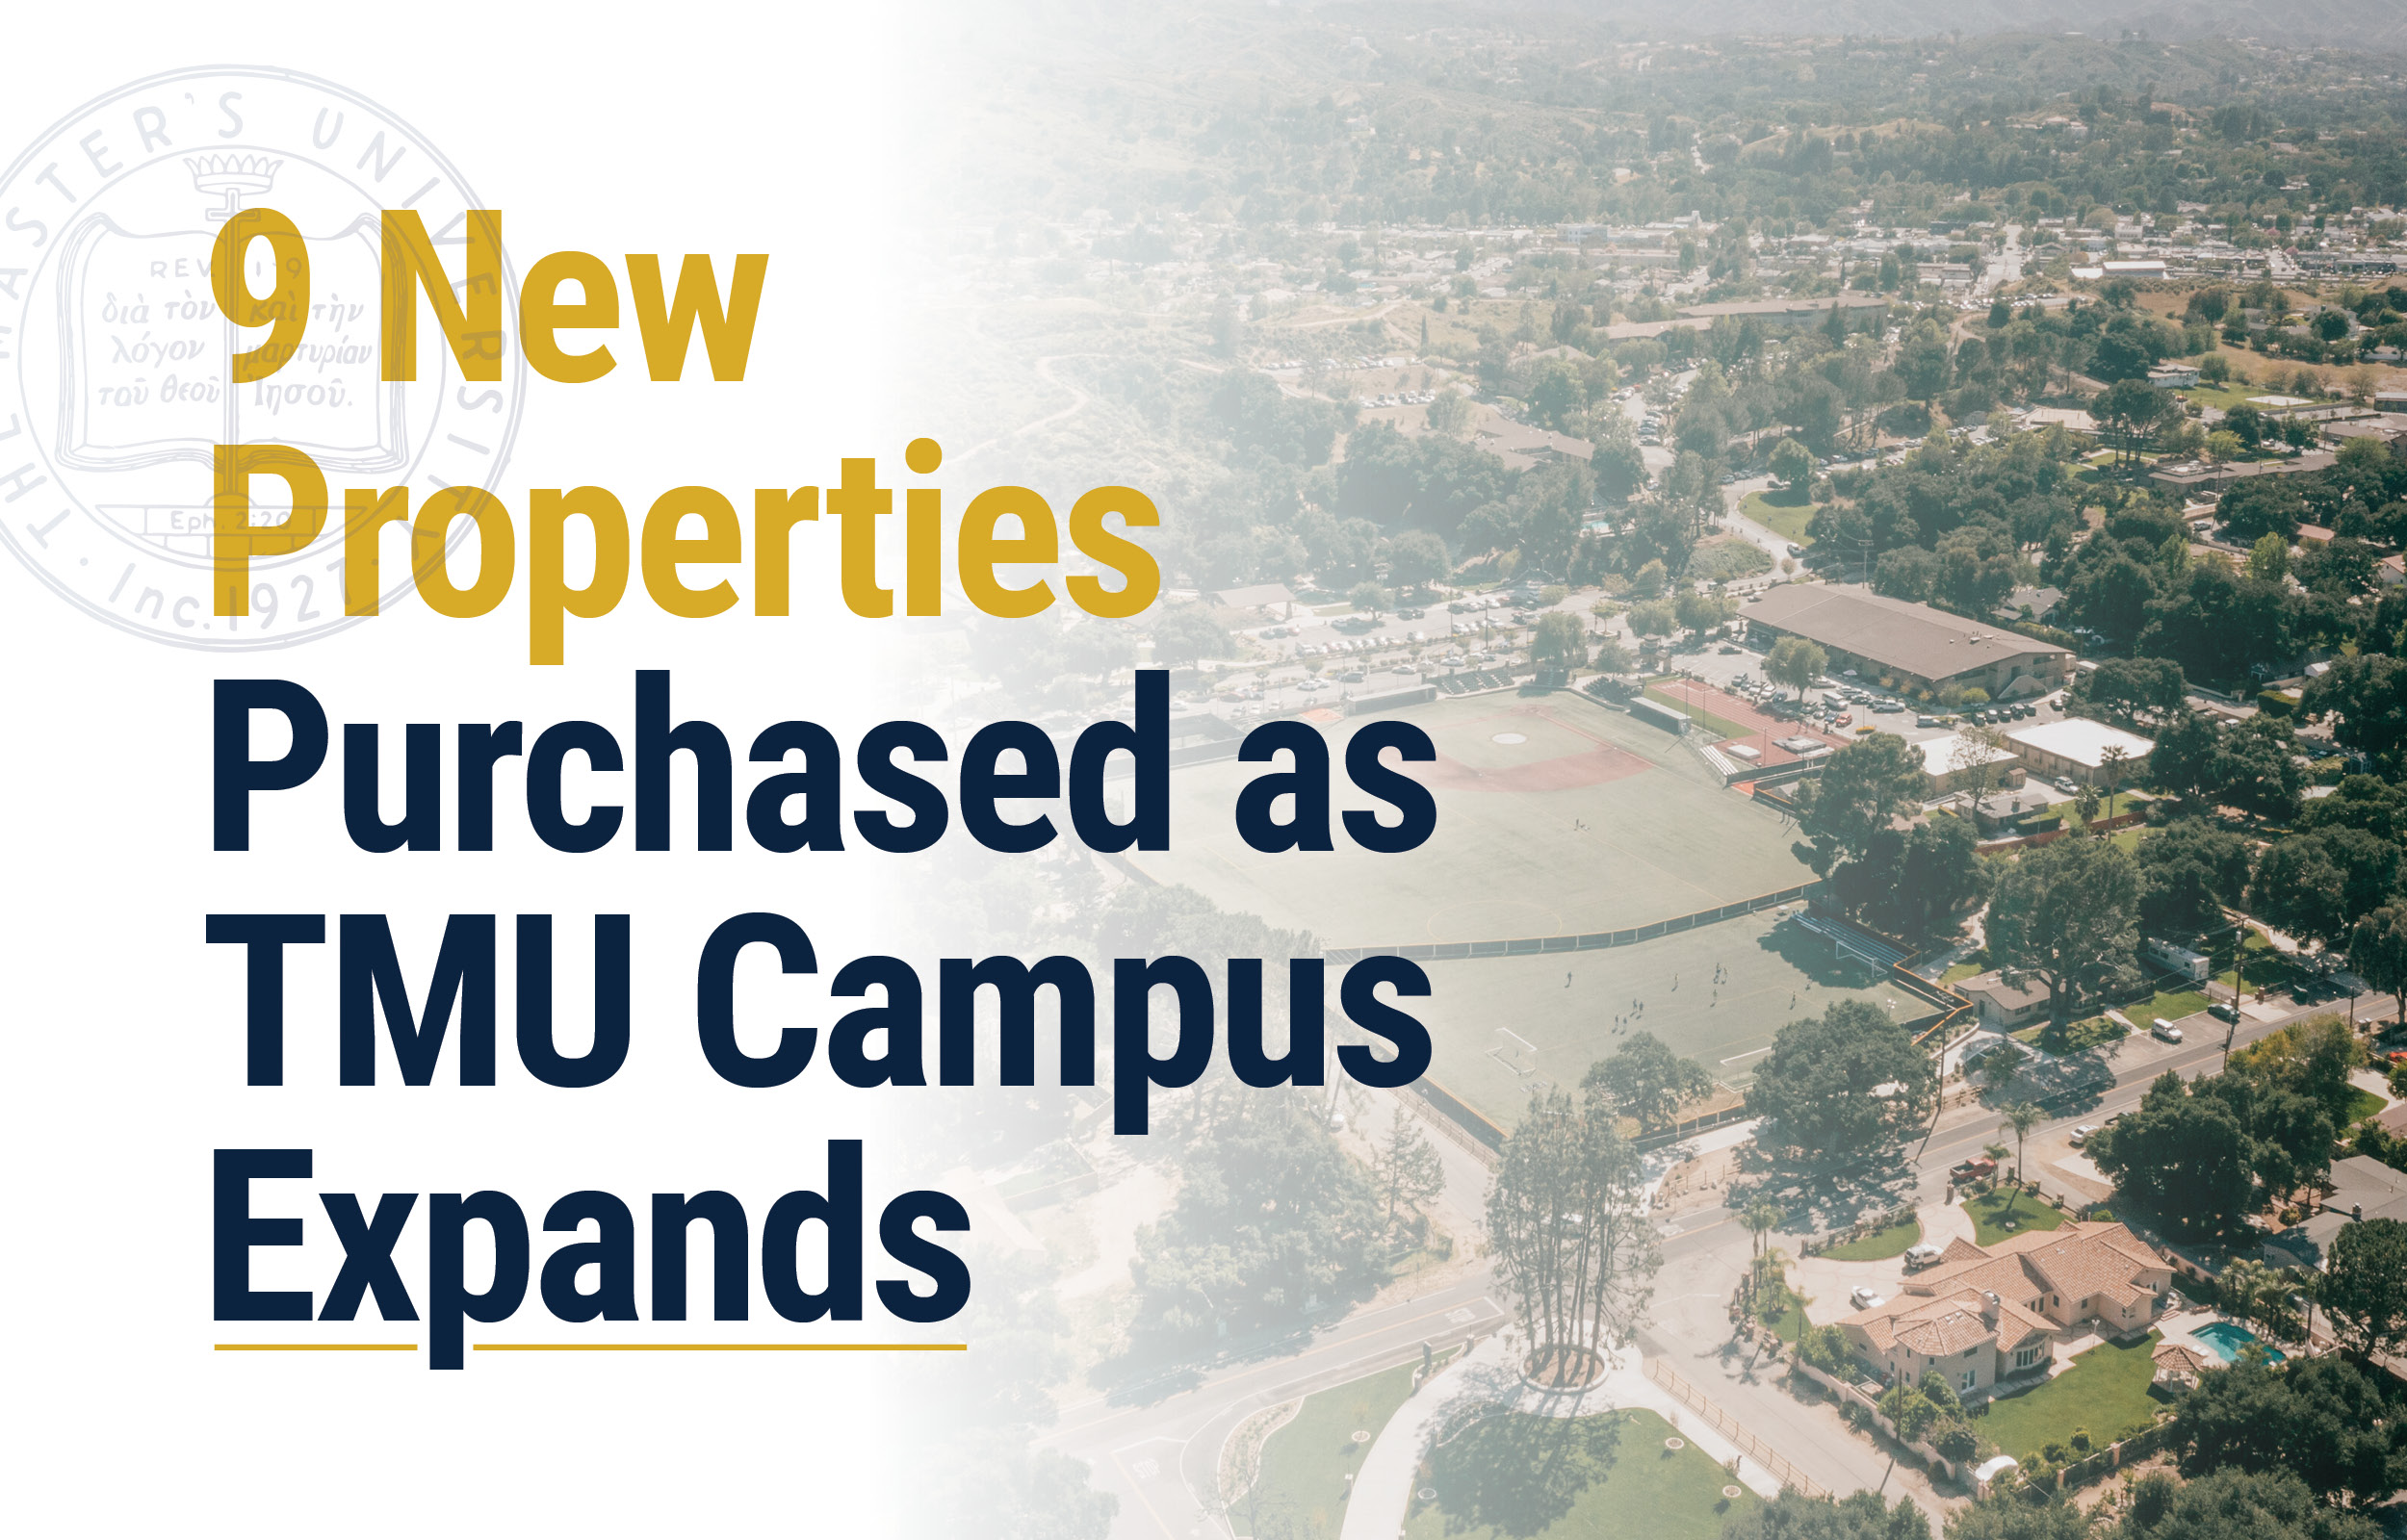 TMU Campus Expands With Purchase of 9 New Properties image